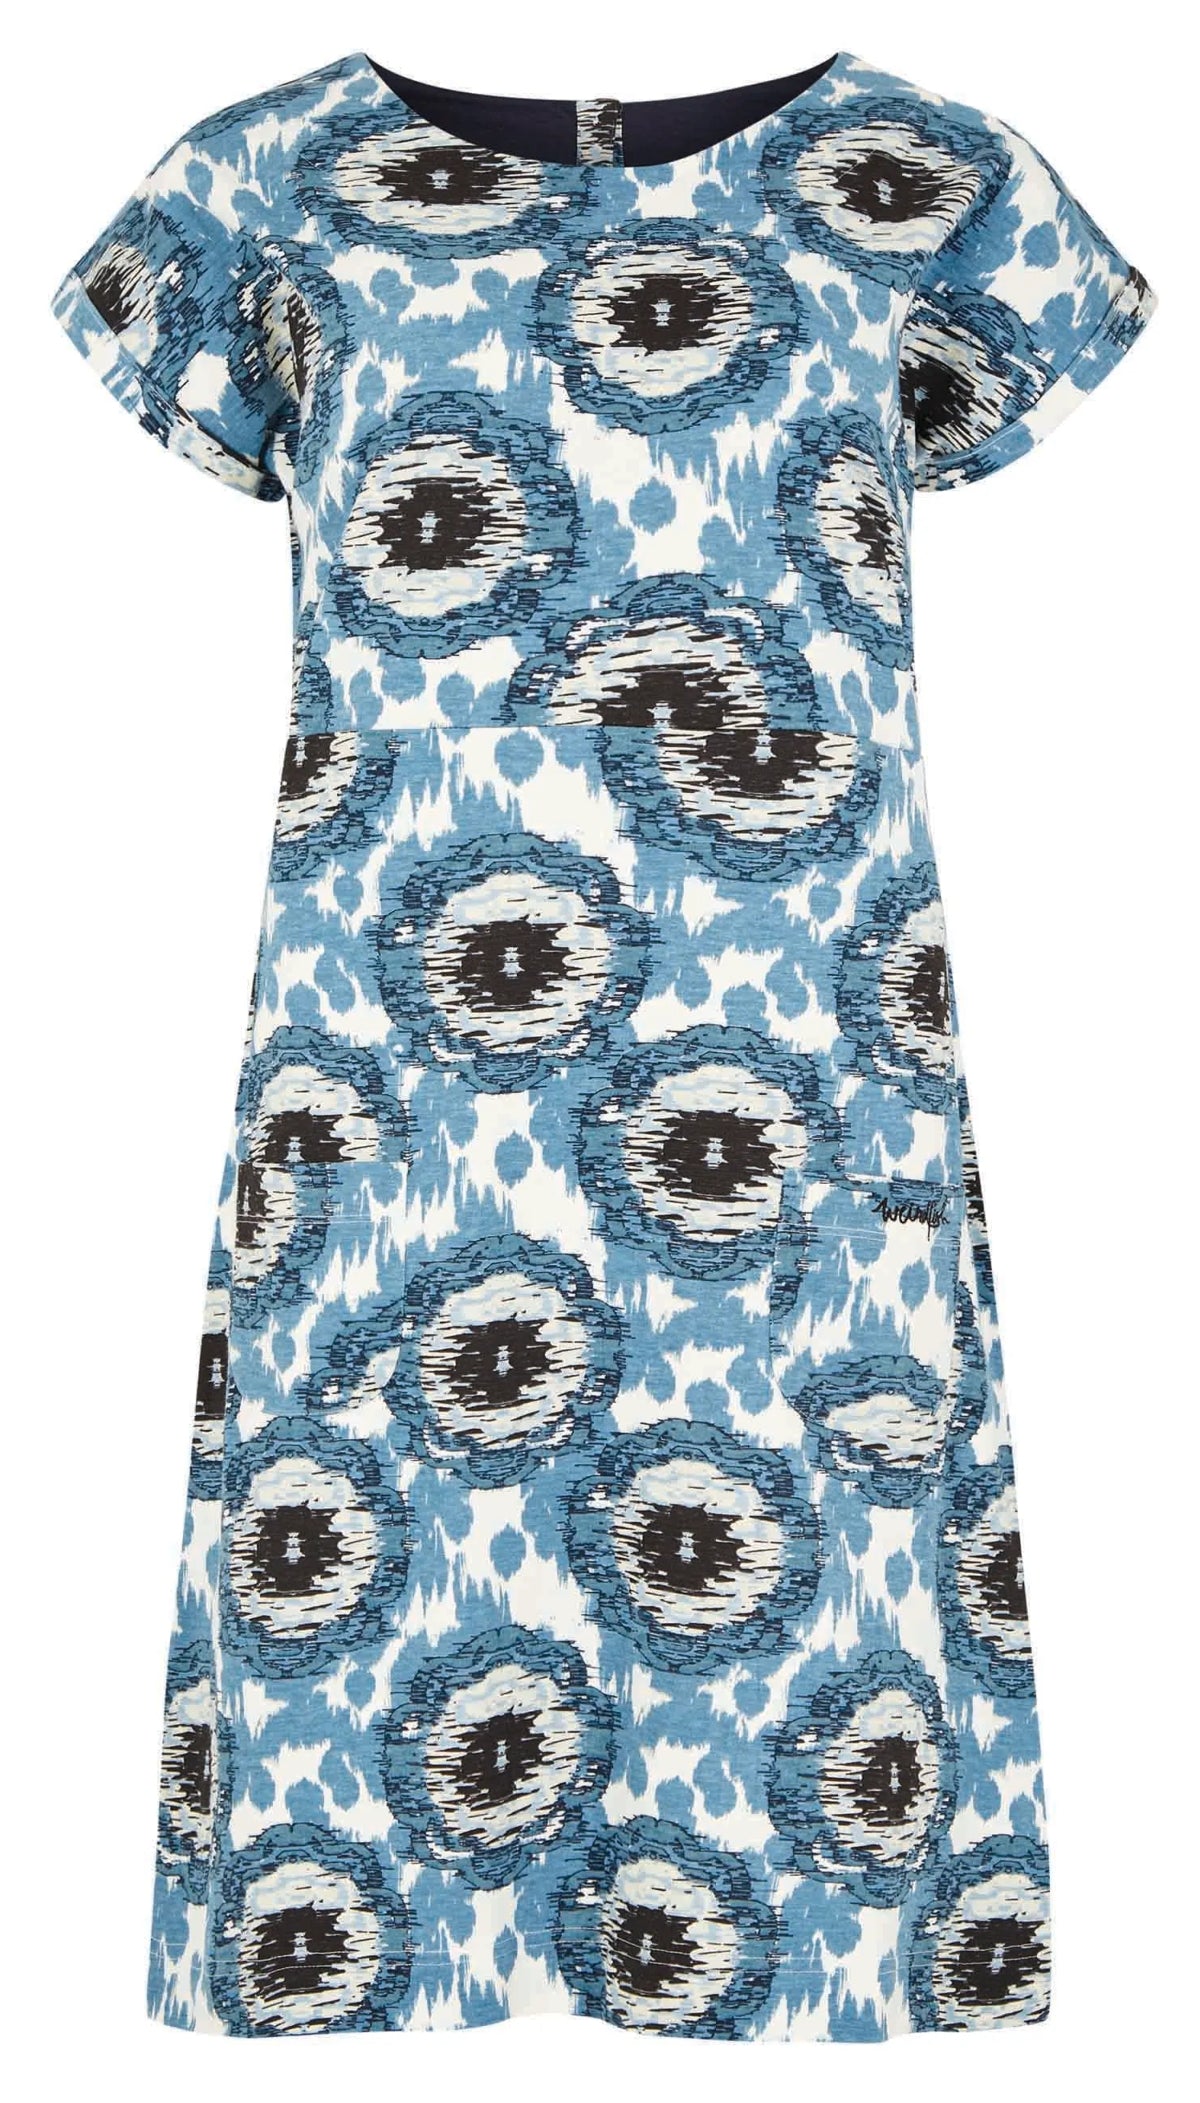 Women's Tallahassee cotton jersey dress from Weird Fish in a Pale Denim Blue circle pattern and front pockets.